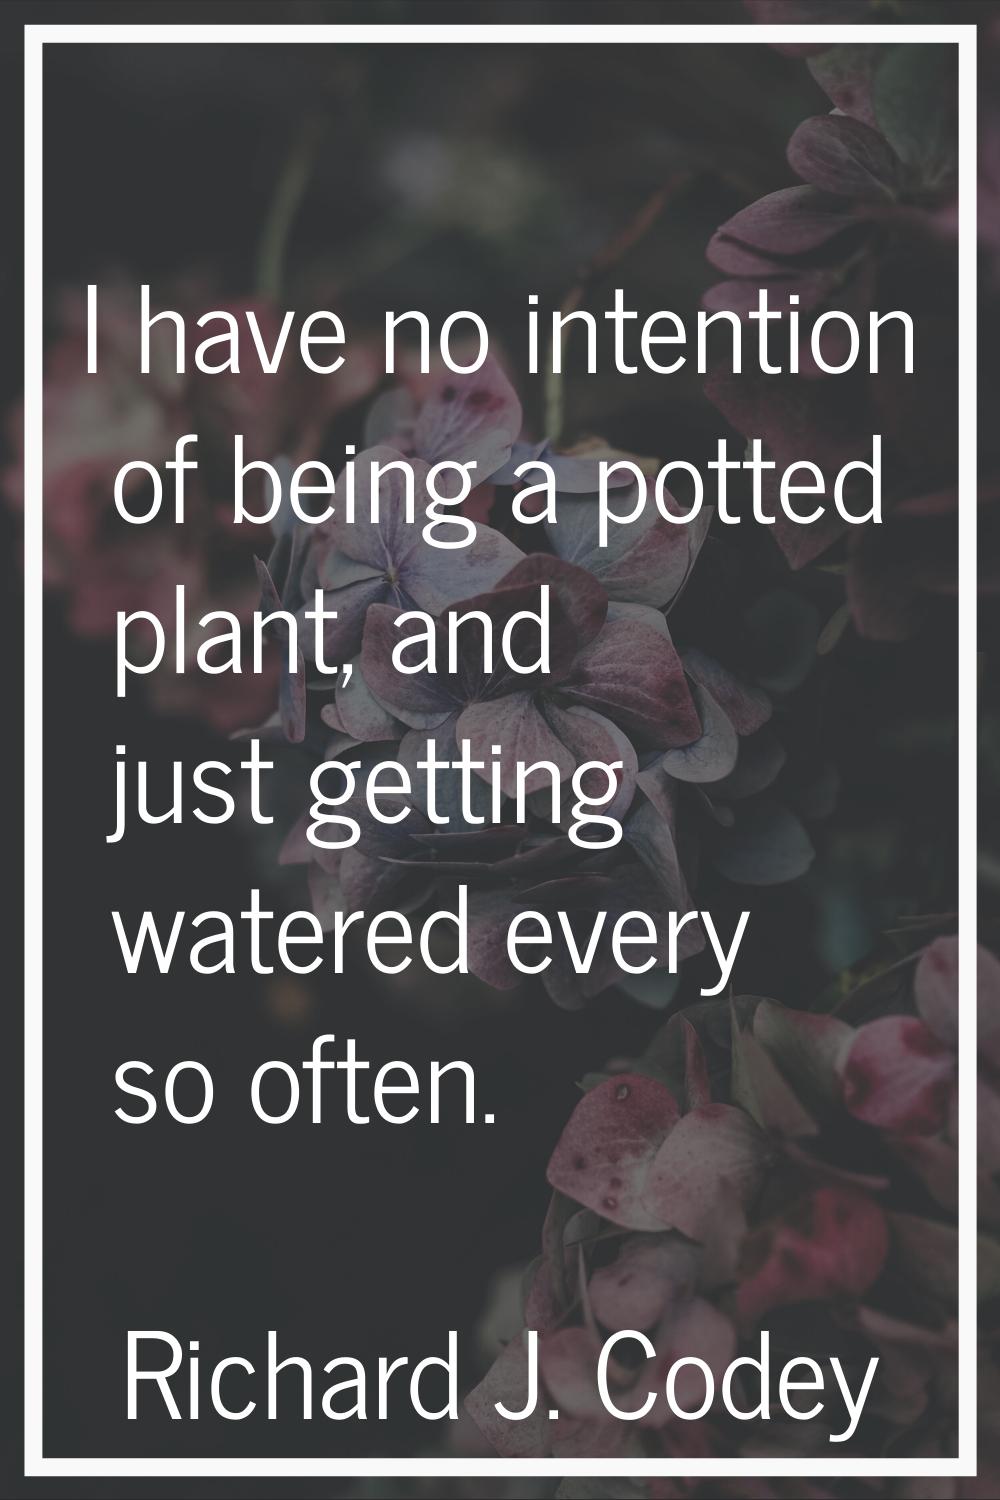 I have no intention of being a potted plant, and just getting watered every so often.